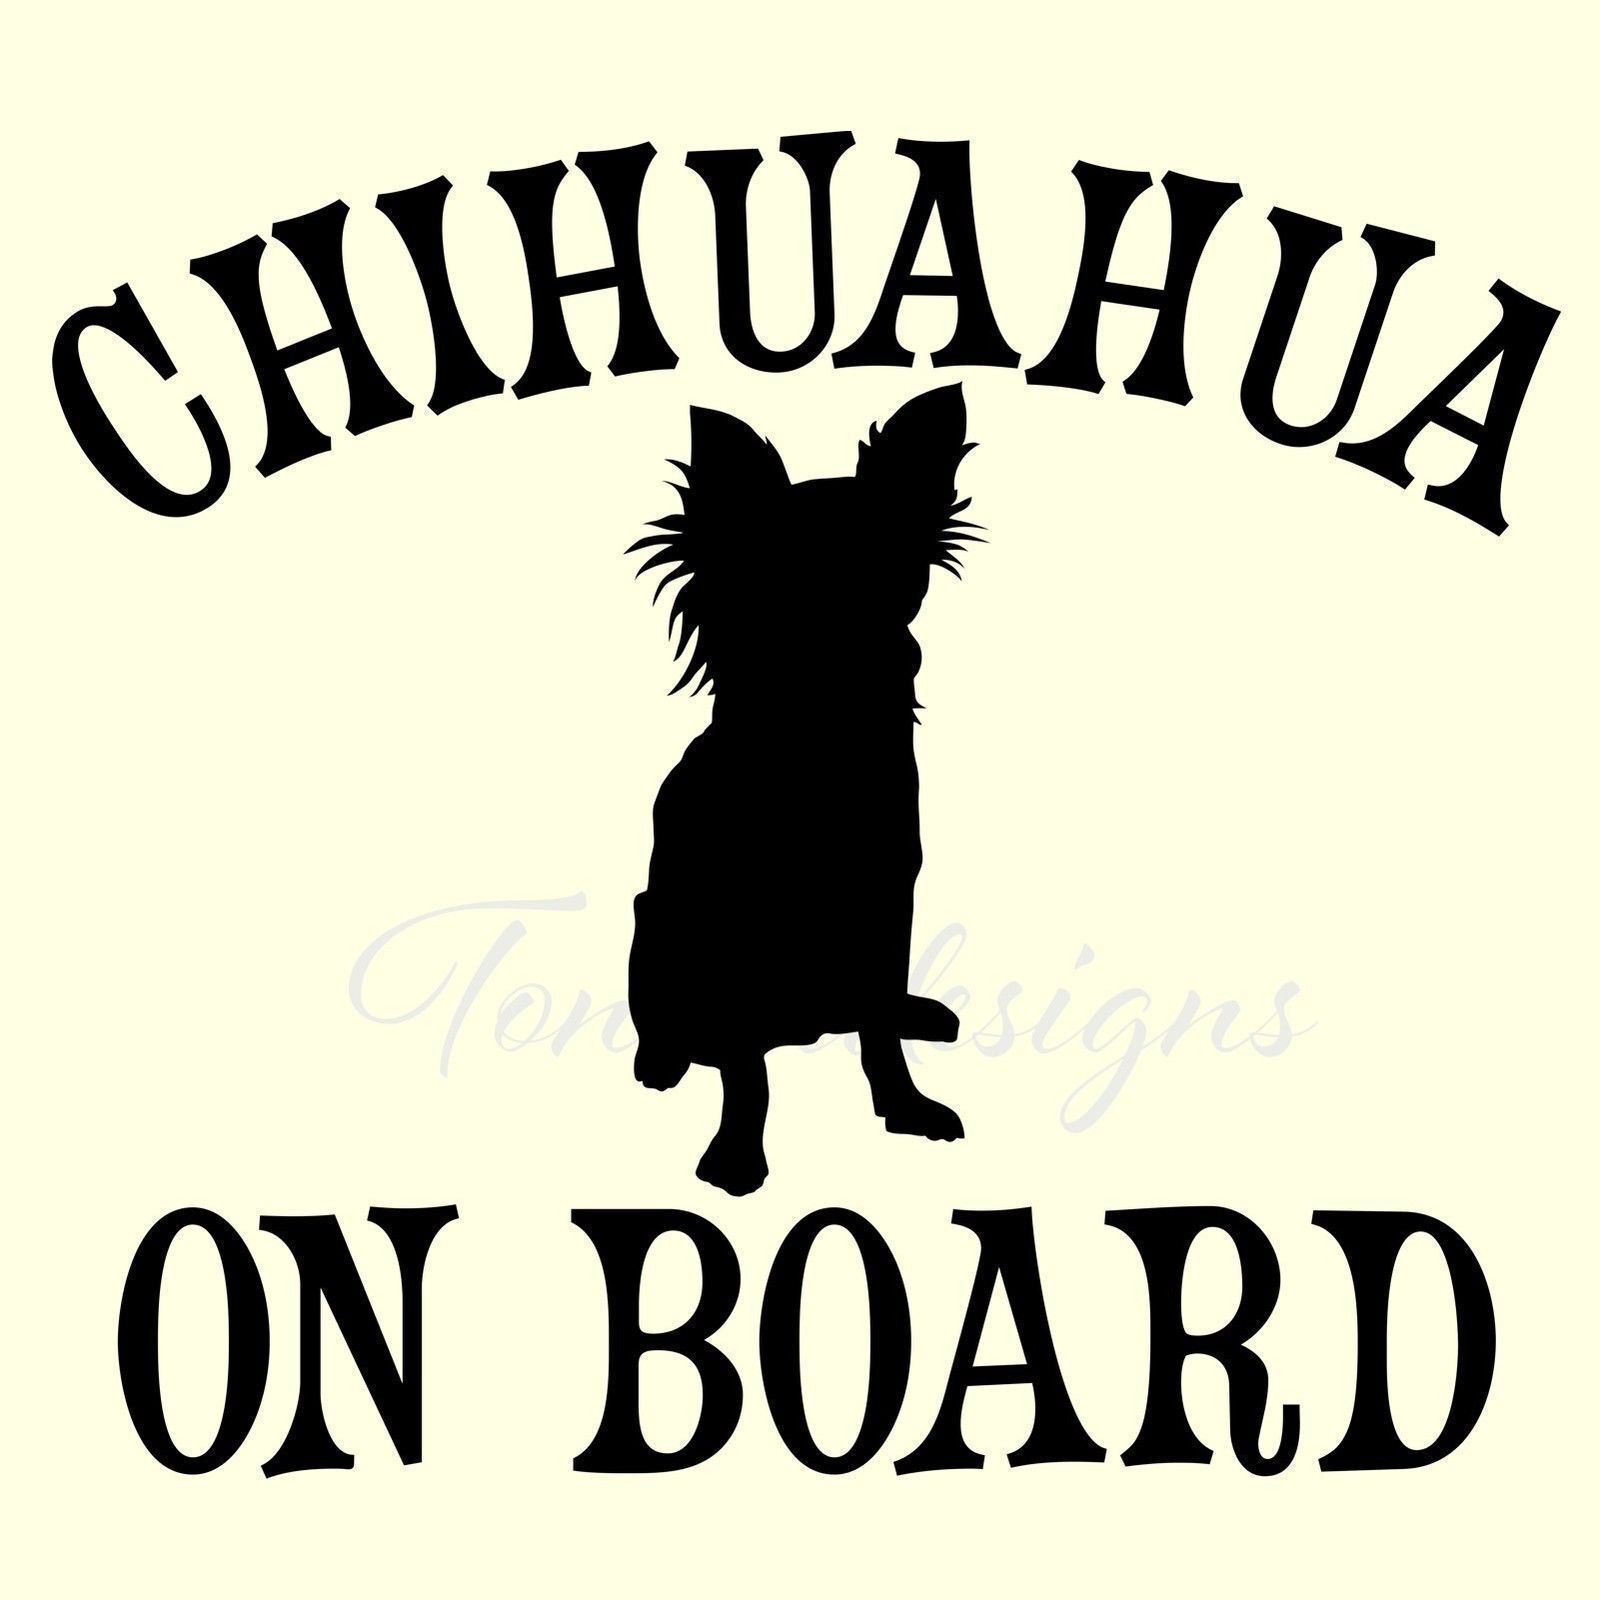 CHIHUAHUA ON BOARD dog vinyl sticker decal for car window or bumper